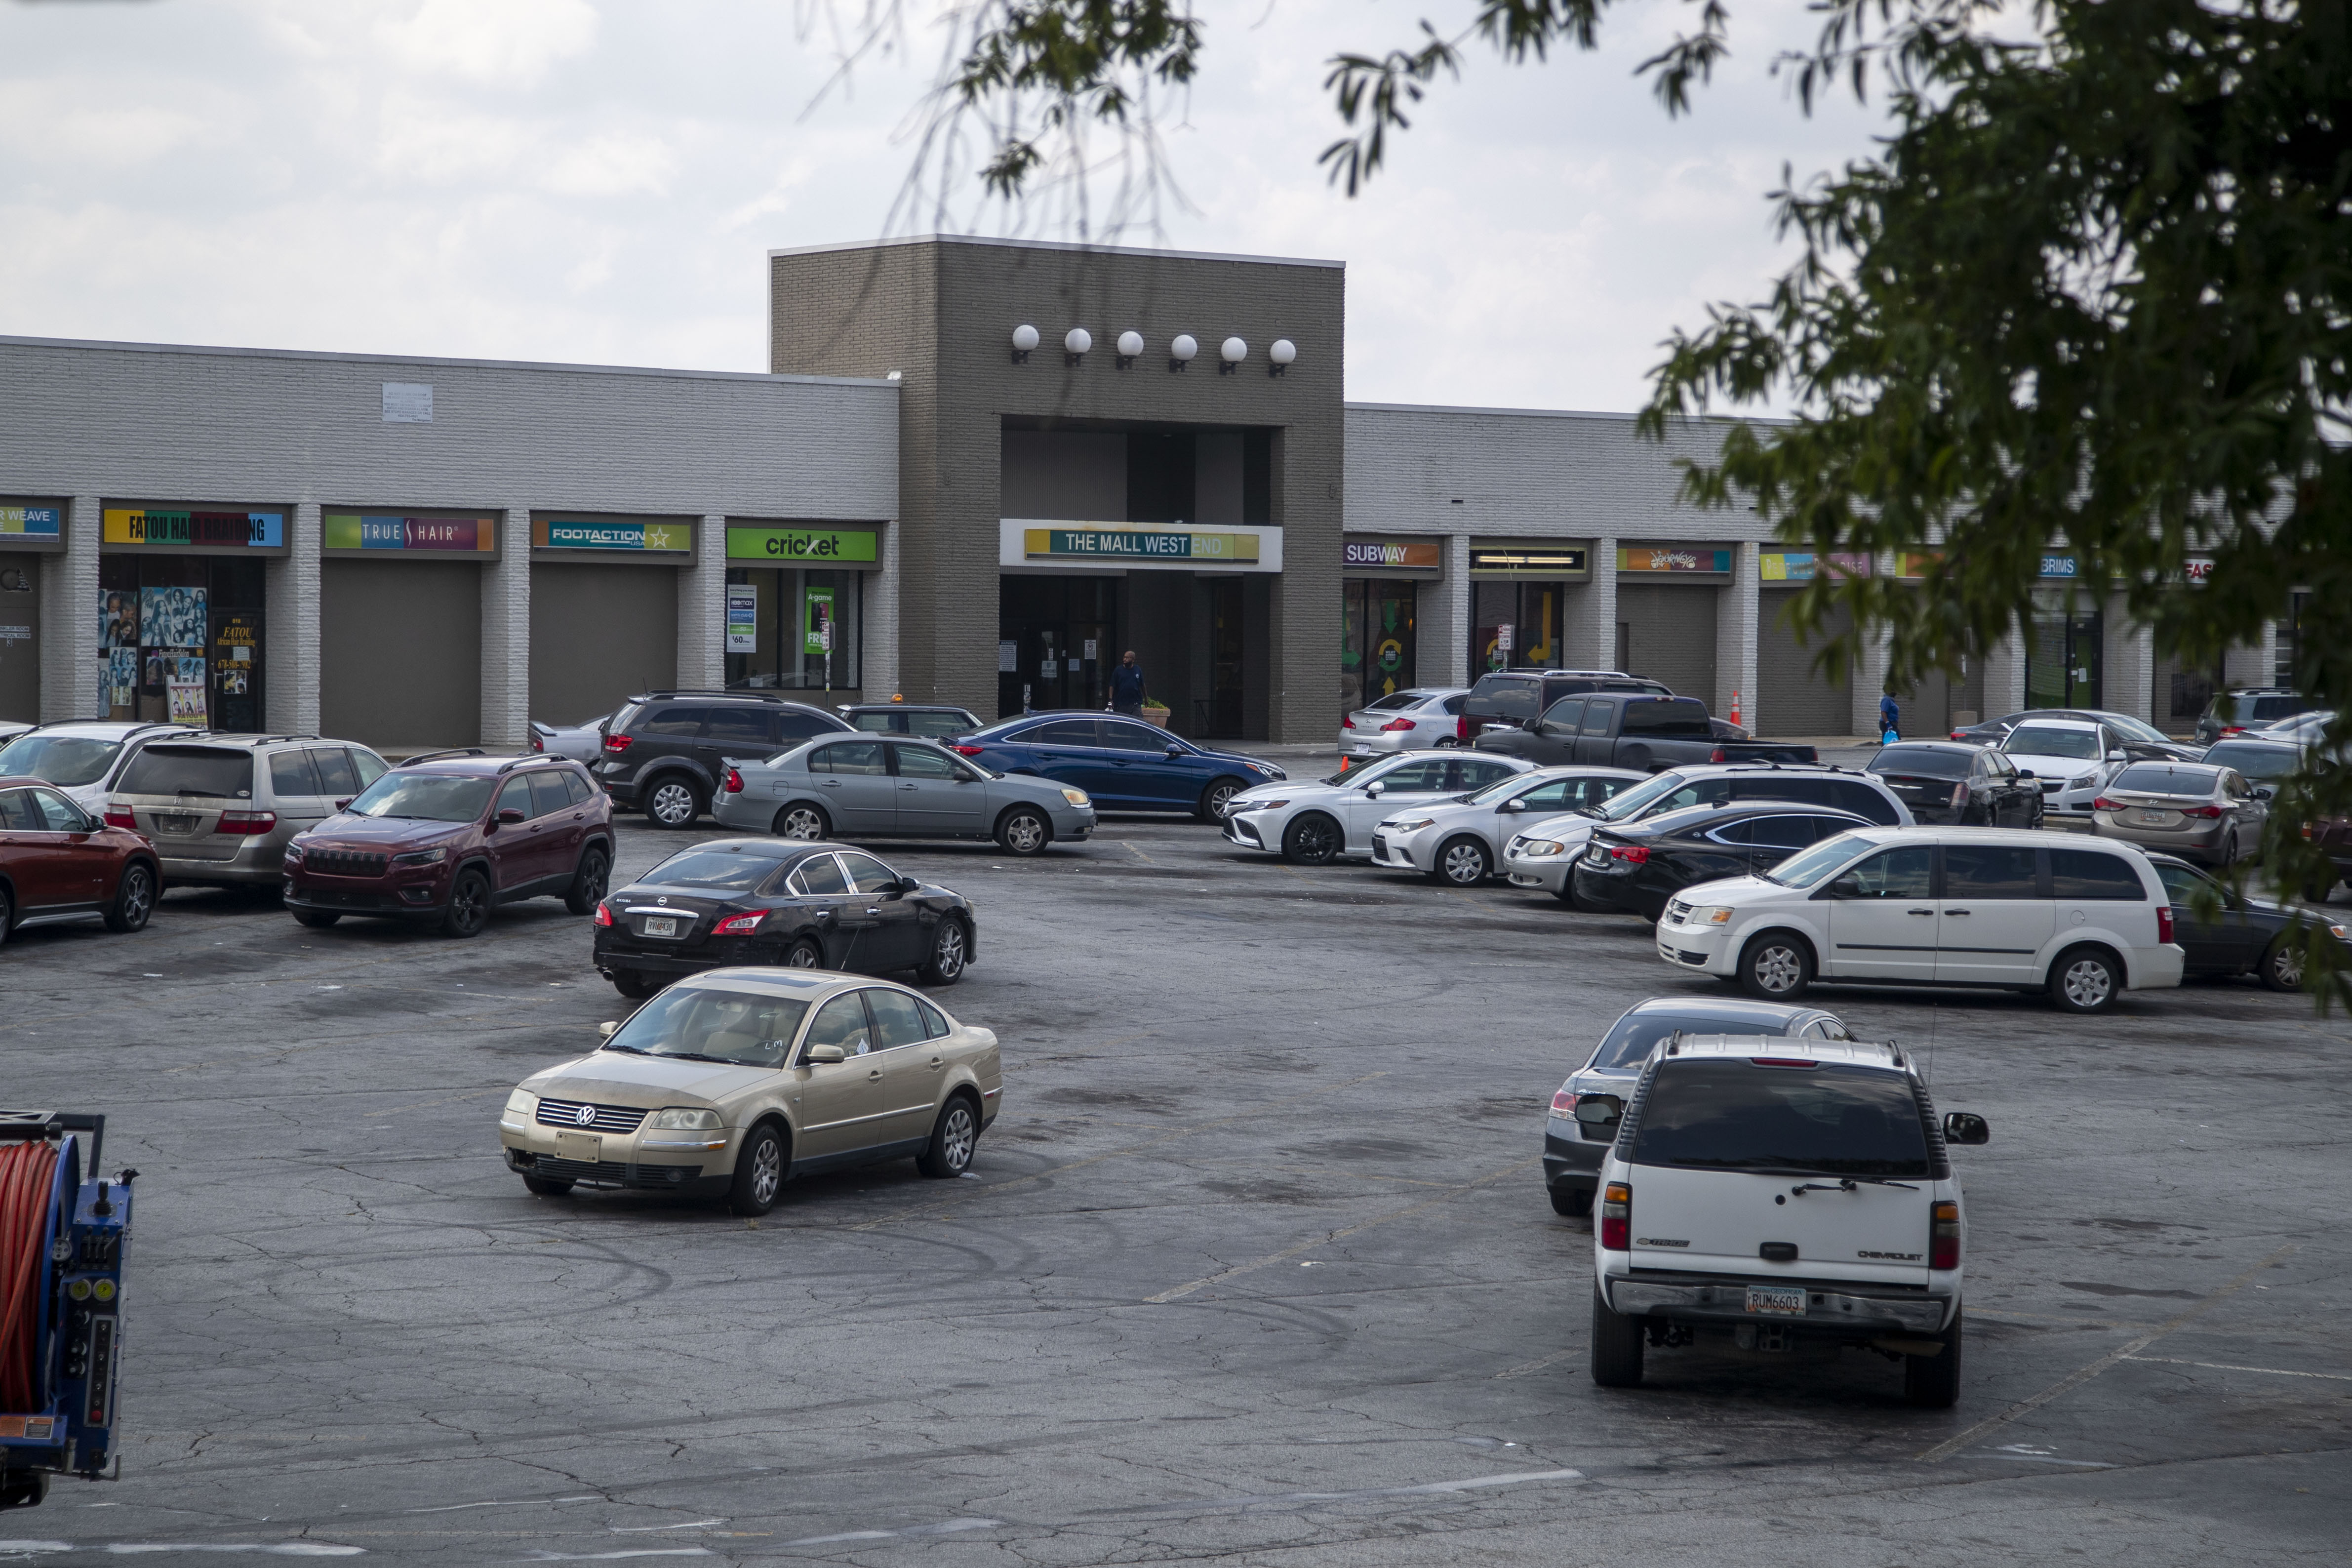 A new development firm has a deal to buy West End mall in Atlanta